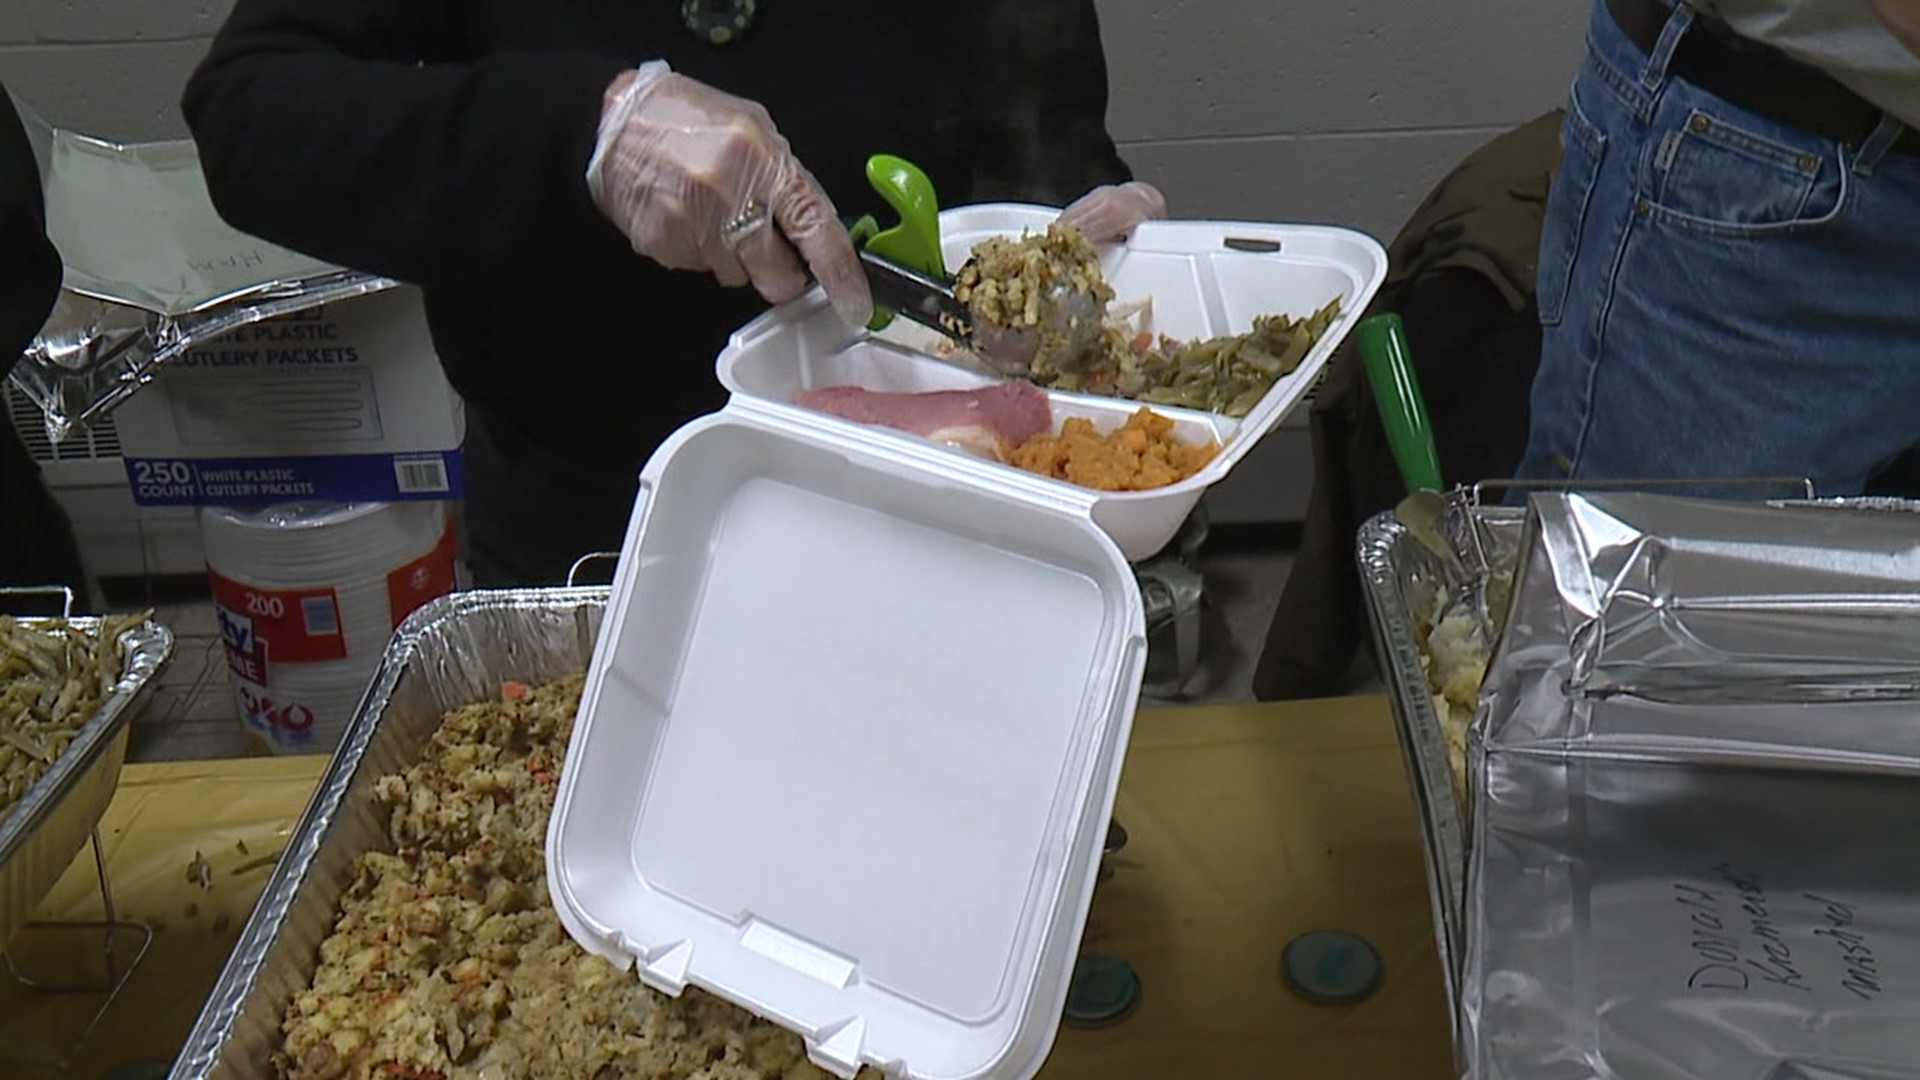 Volunteers in Dickson City are spending part of their Thanksgiving holiday serving a free meal.